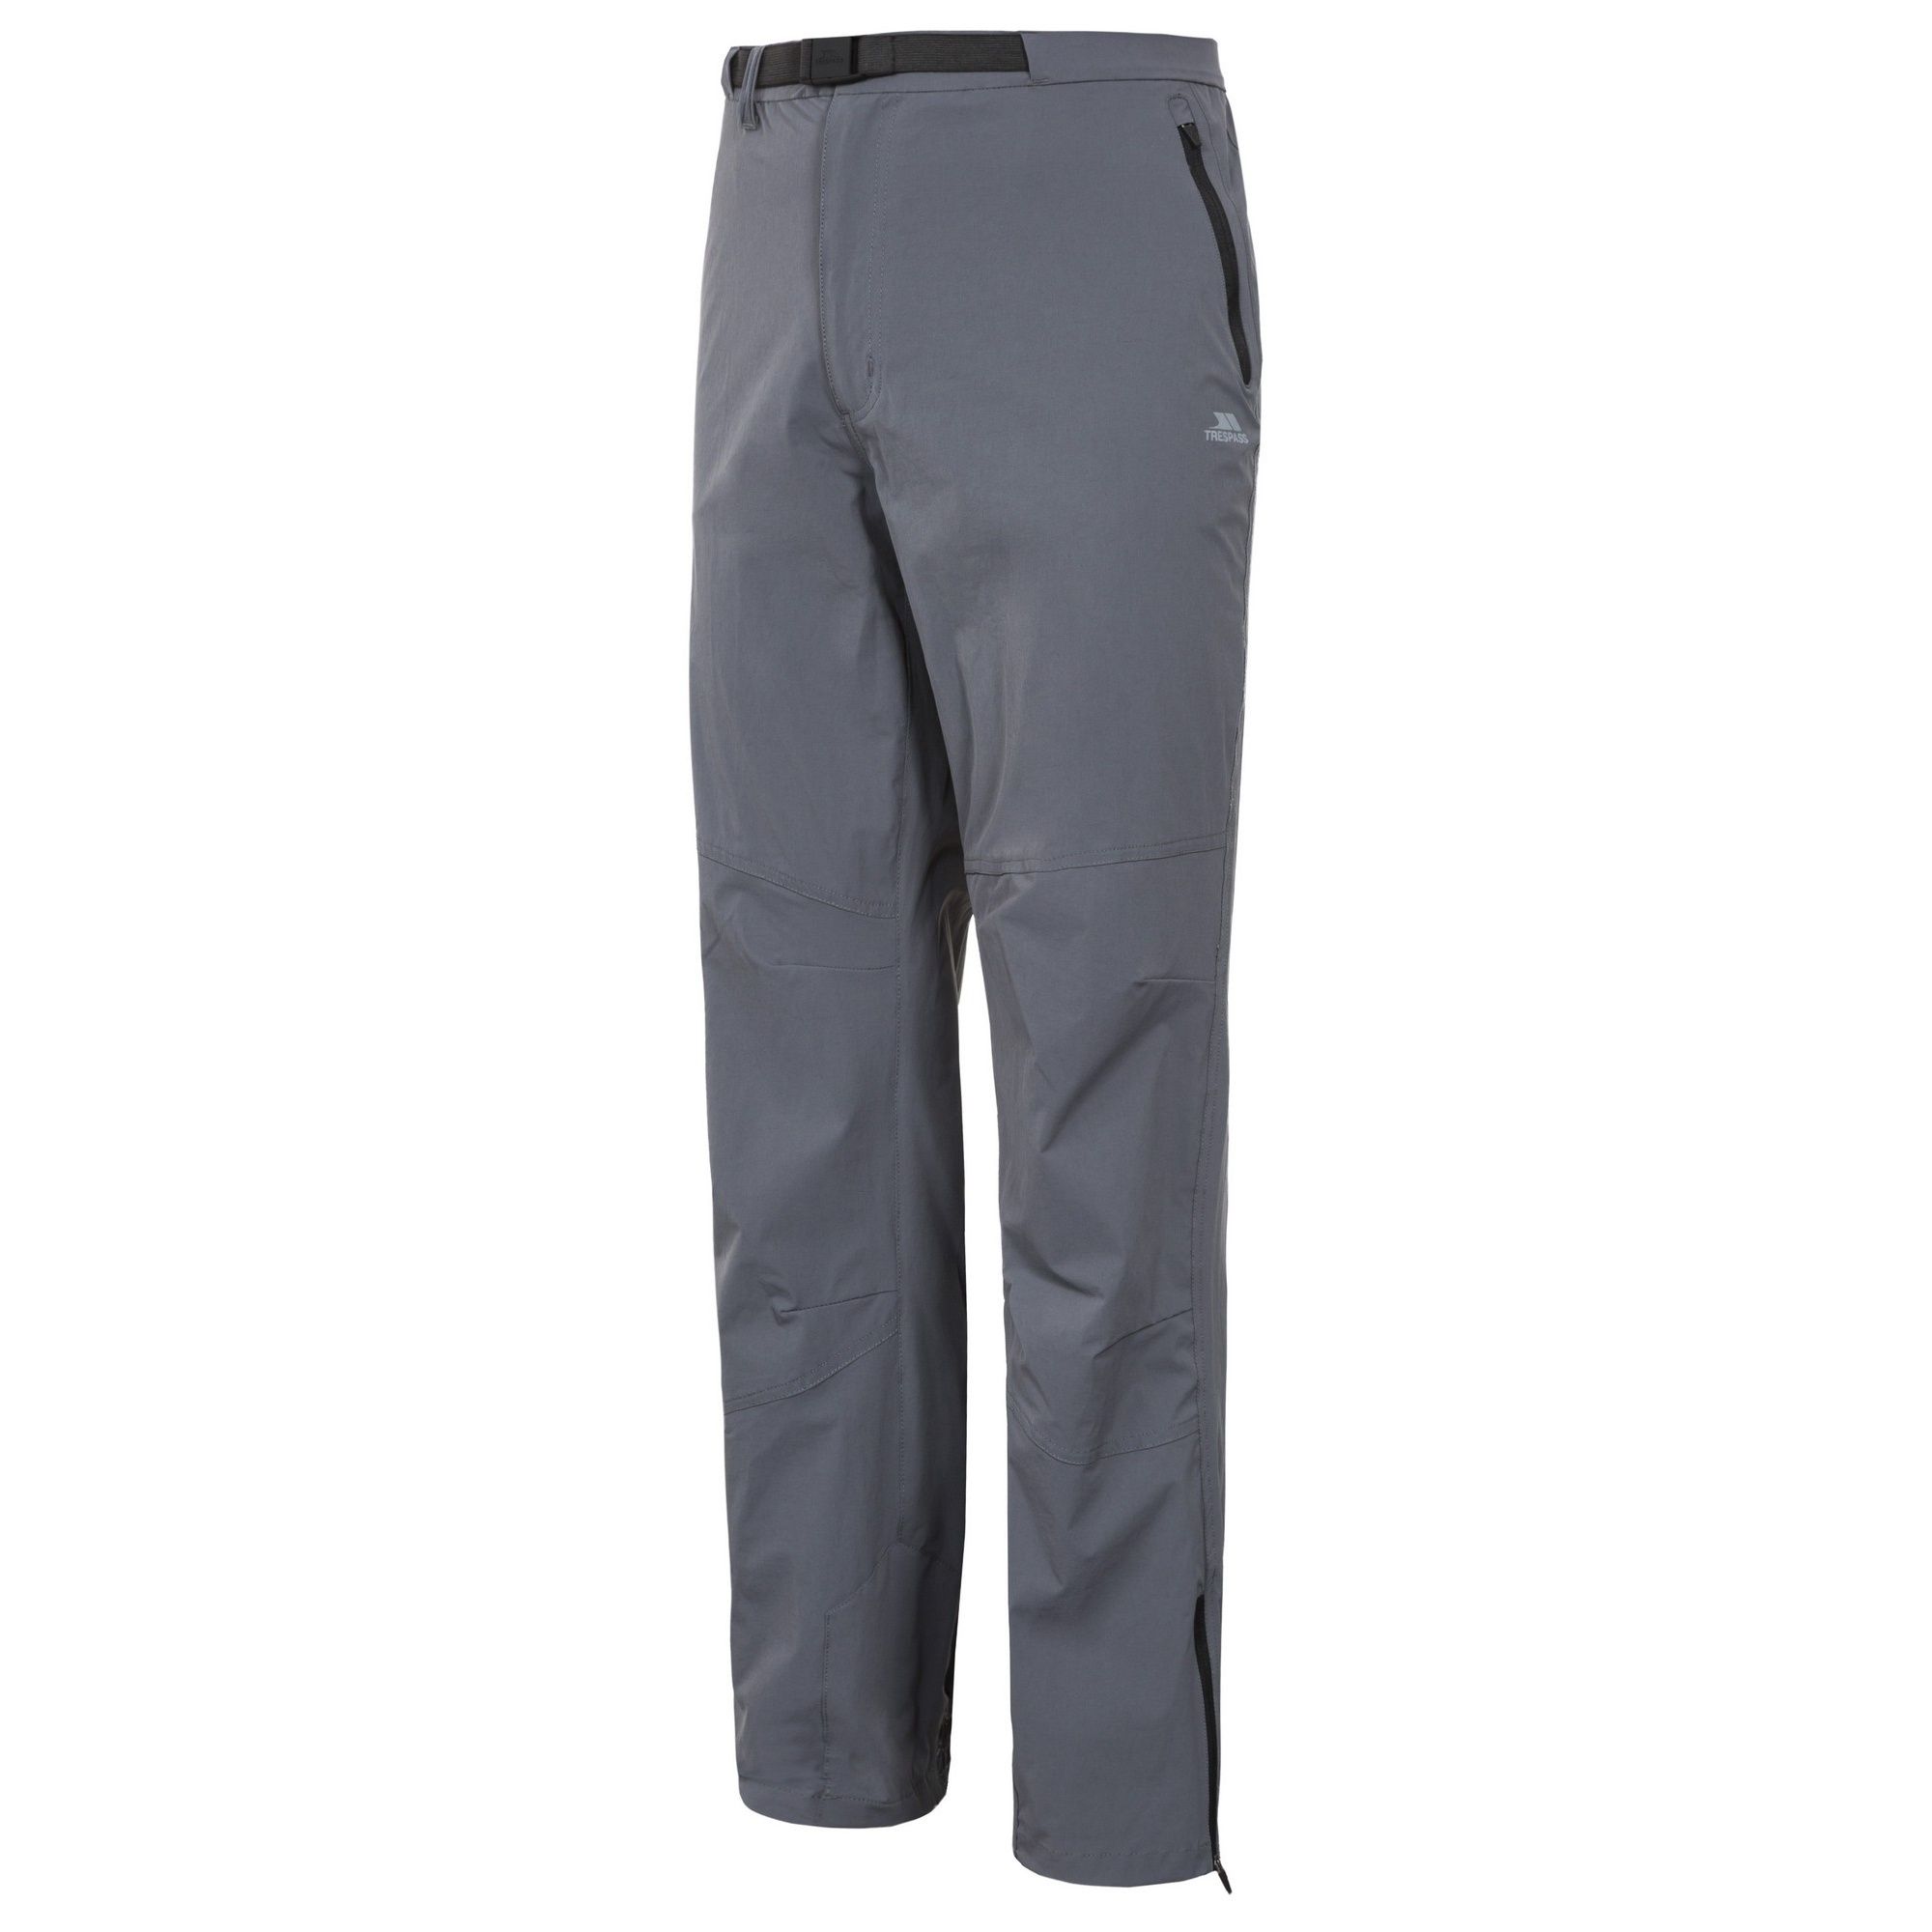 Flat waisted trousers with elasticated back panel. 2 zip pockets. Side leg zip with vent. Elasticated back hem. Quick dry. Comfort stretch. UV 40+. 85% polyester, 15% elastane. Trespass Mens Waist Sizing (approx): S - 32in/81cm, M - 34in/86cm, L - 36in/91.5cm, XL - 38in/96.5cm, XXL - 40in/101.5cm, XXXL - 42in/106.5cm.